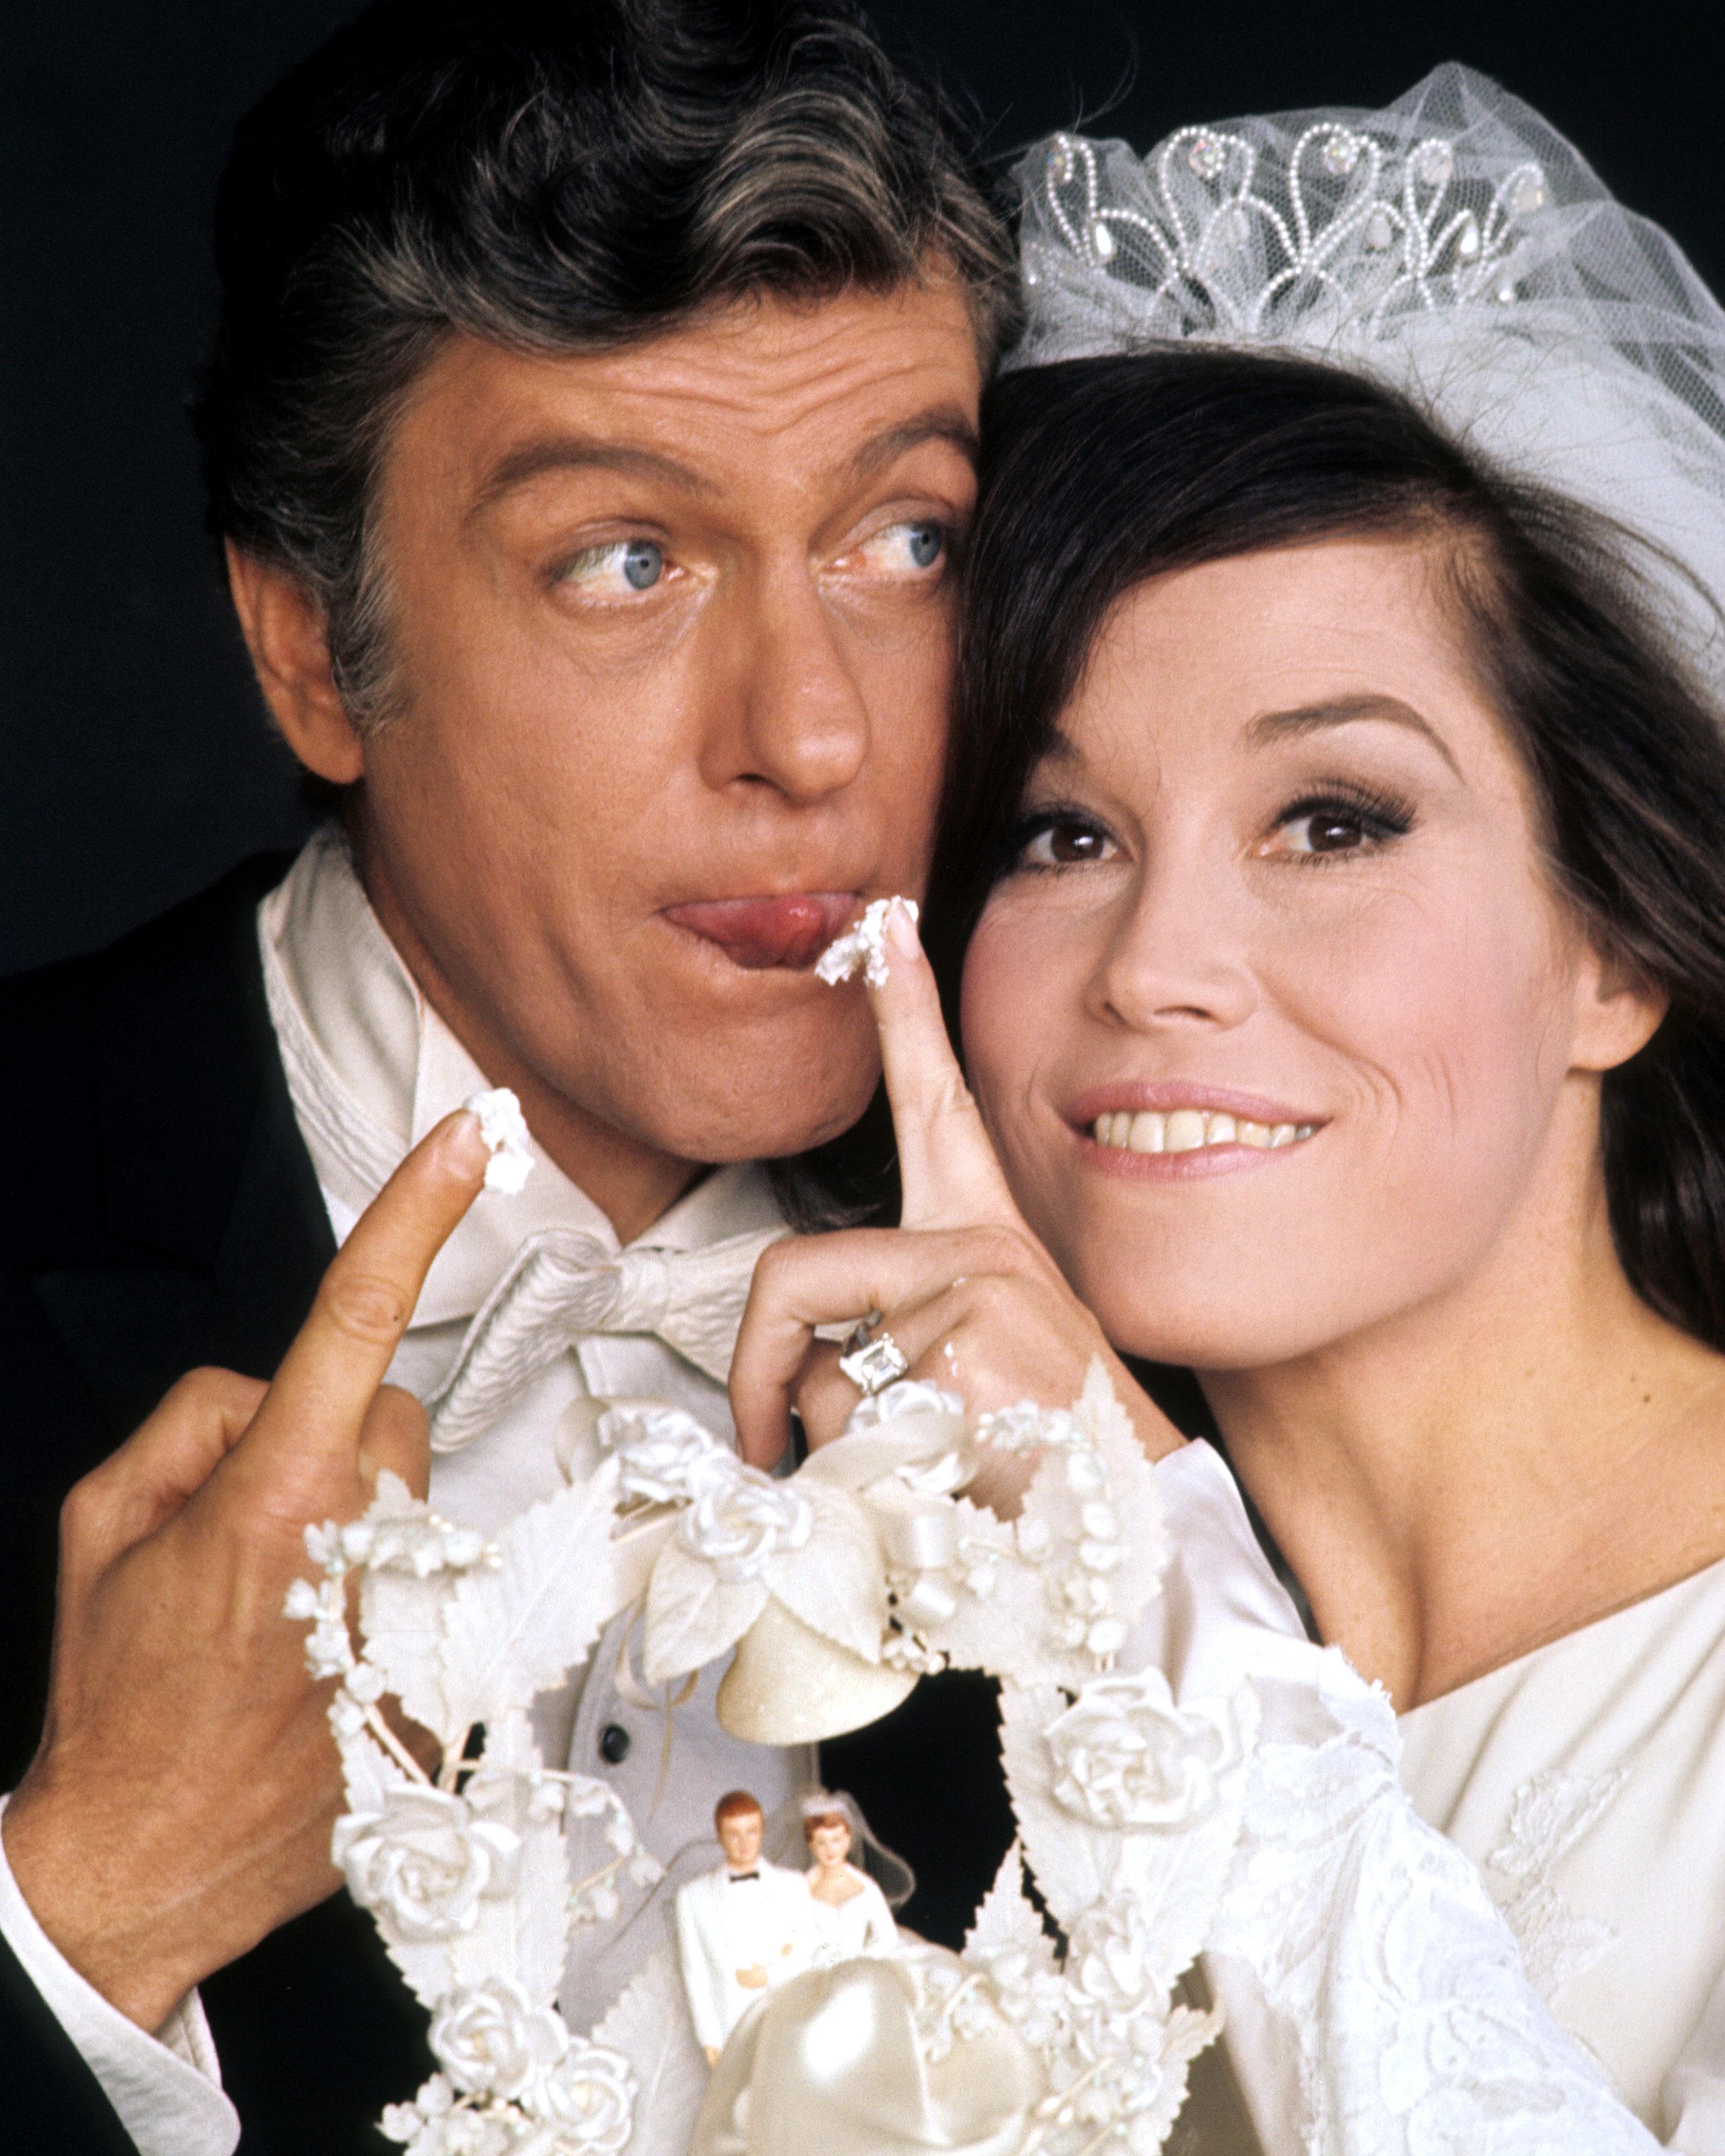 Dick Van Dyke, US actor, and Mary Tyler Moore, US actress, in a wedding dress, with a piece of icing from a wedding cake on her finger, in a publicity portrait issued for the US television special, 'Dick Van Dyke and the Other Woman', USA, 1969. | Photo: Getty Images